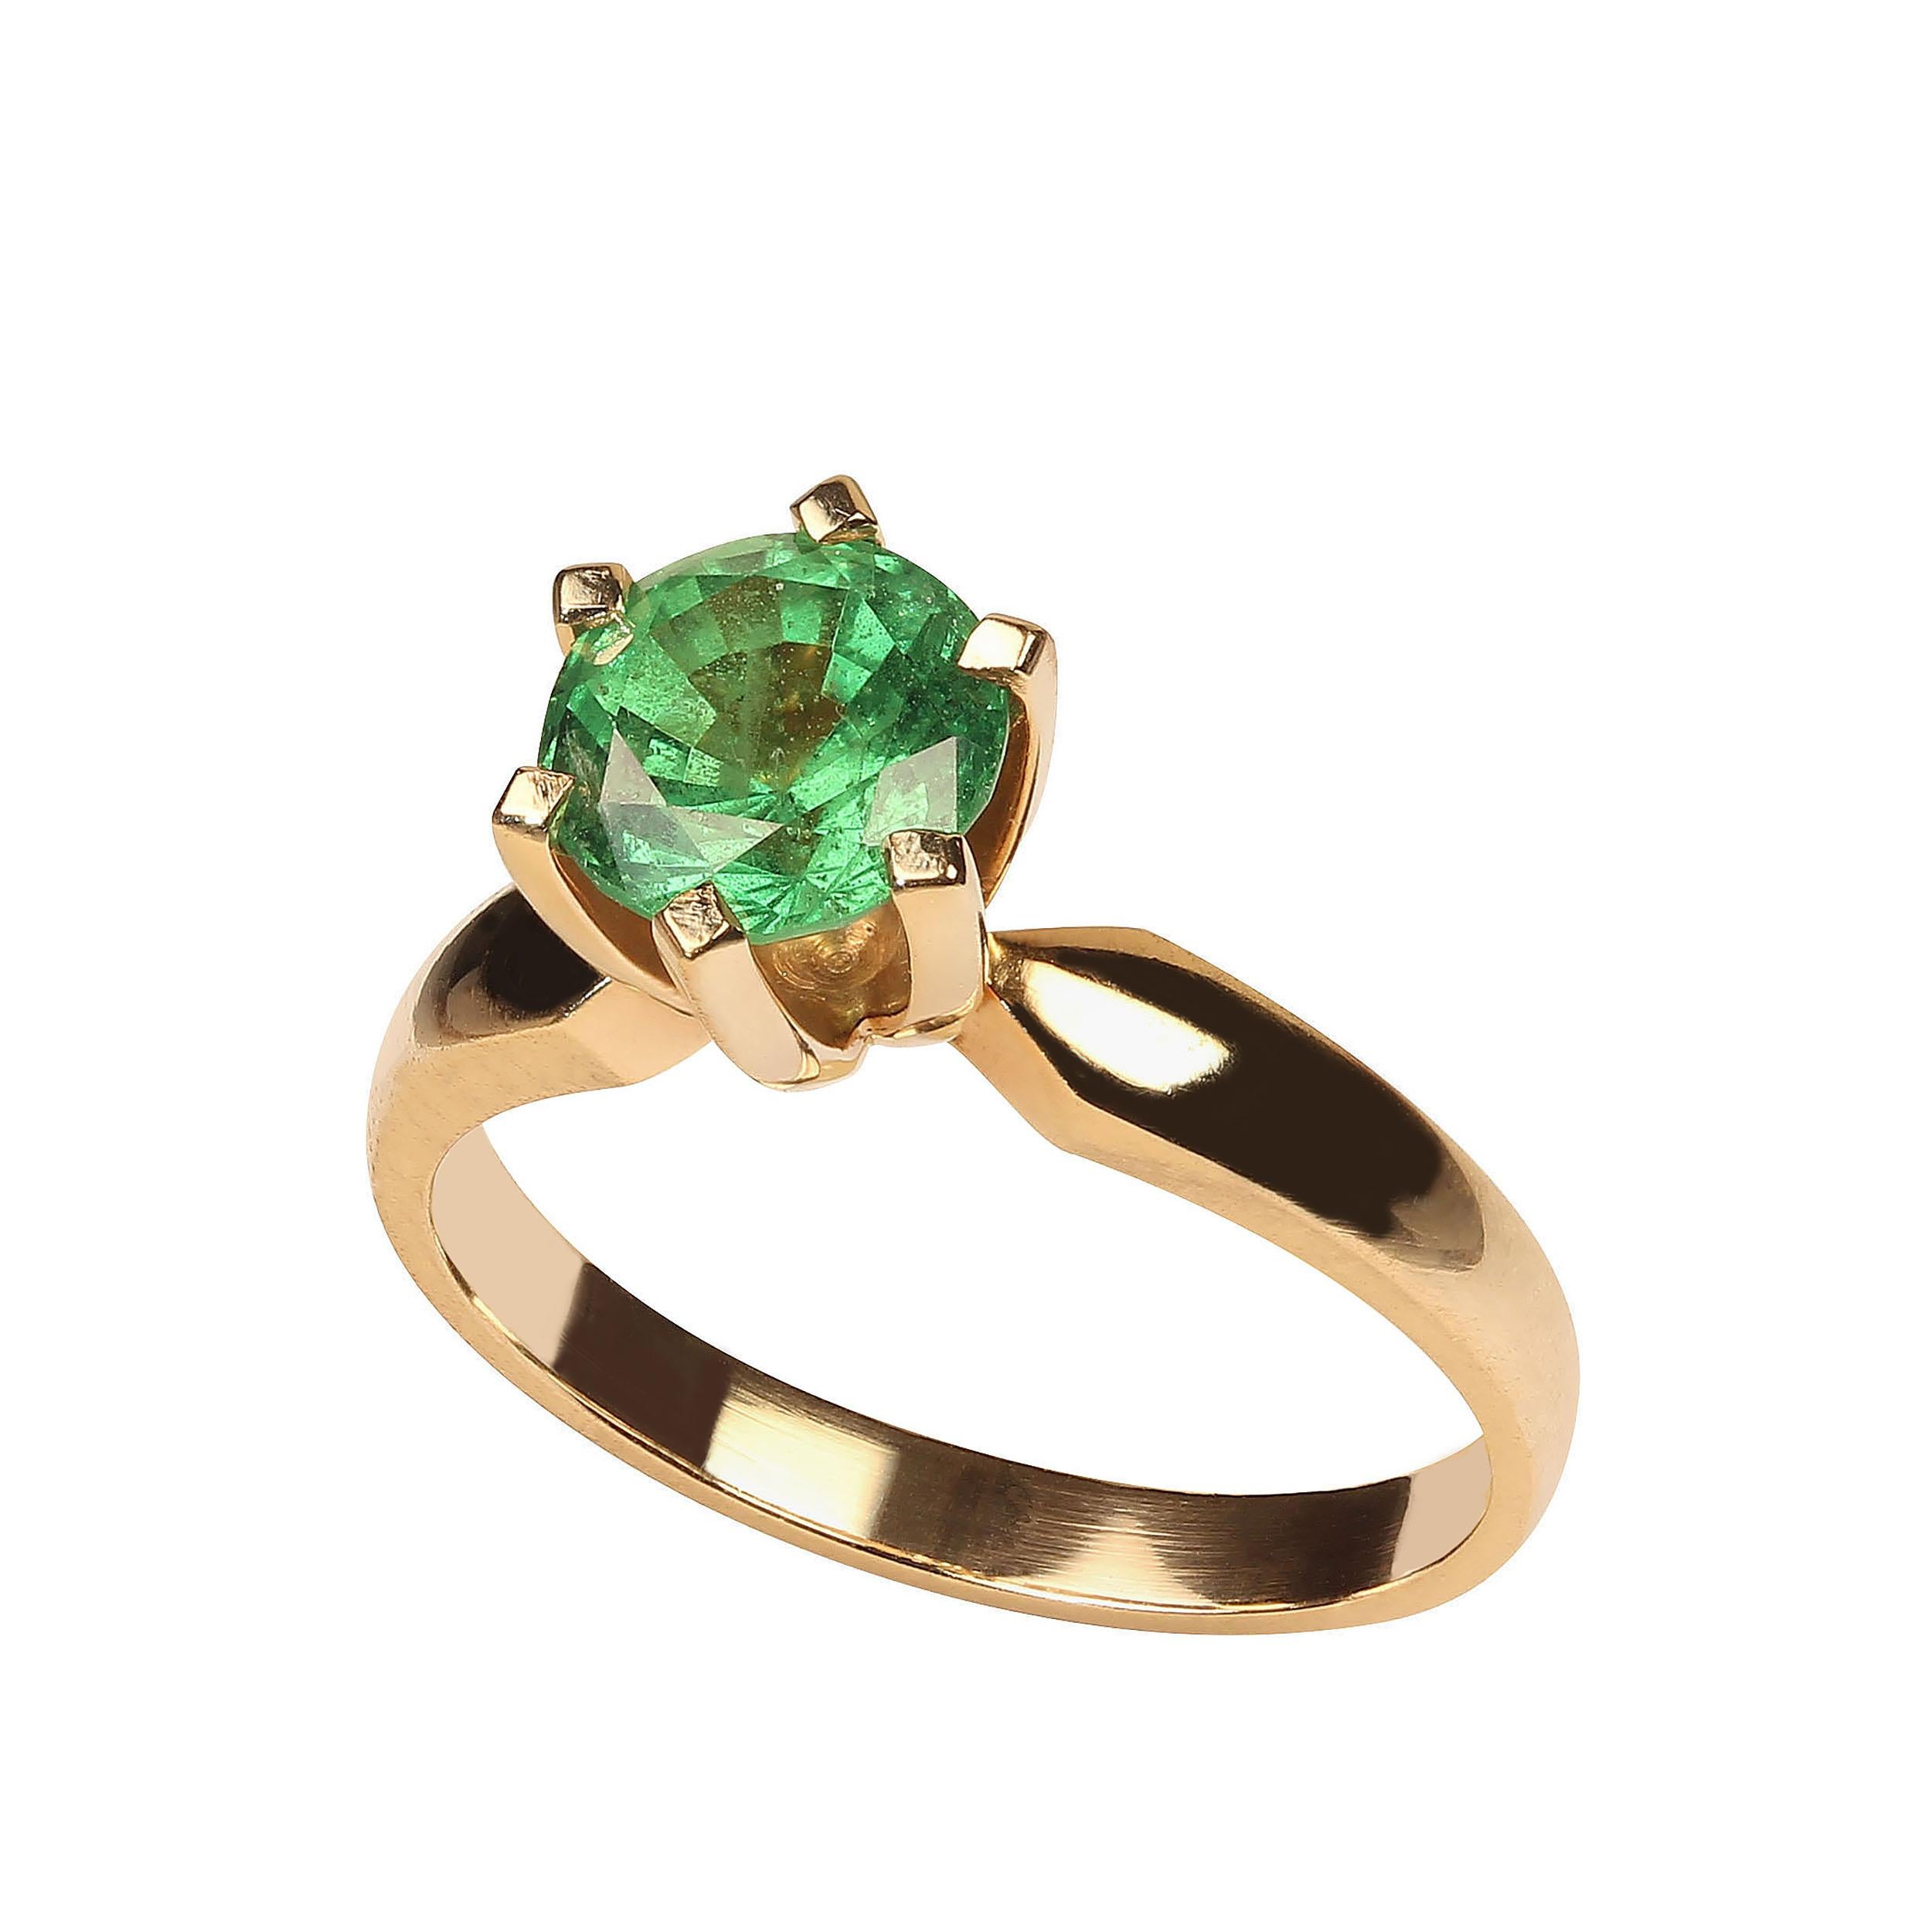 Stylish, elegant 6.7 MM brilliant green Tsavorite Garnet, est 1.0 ct. set in a classic six prong rich 18K yellow gold hand made setting.  This lovely gemstone comes straight from one of our favorite suppliers in the mountains outside of Rio de